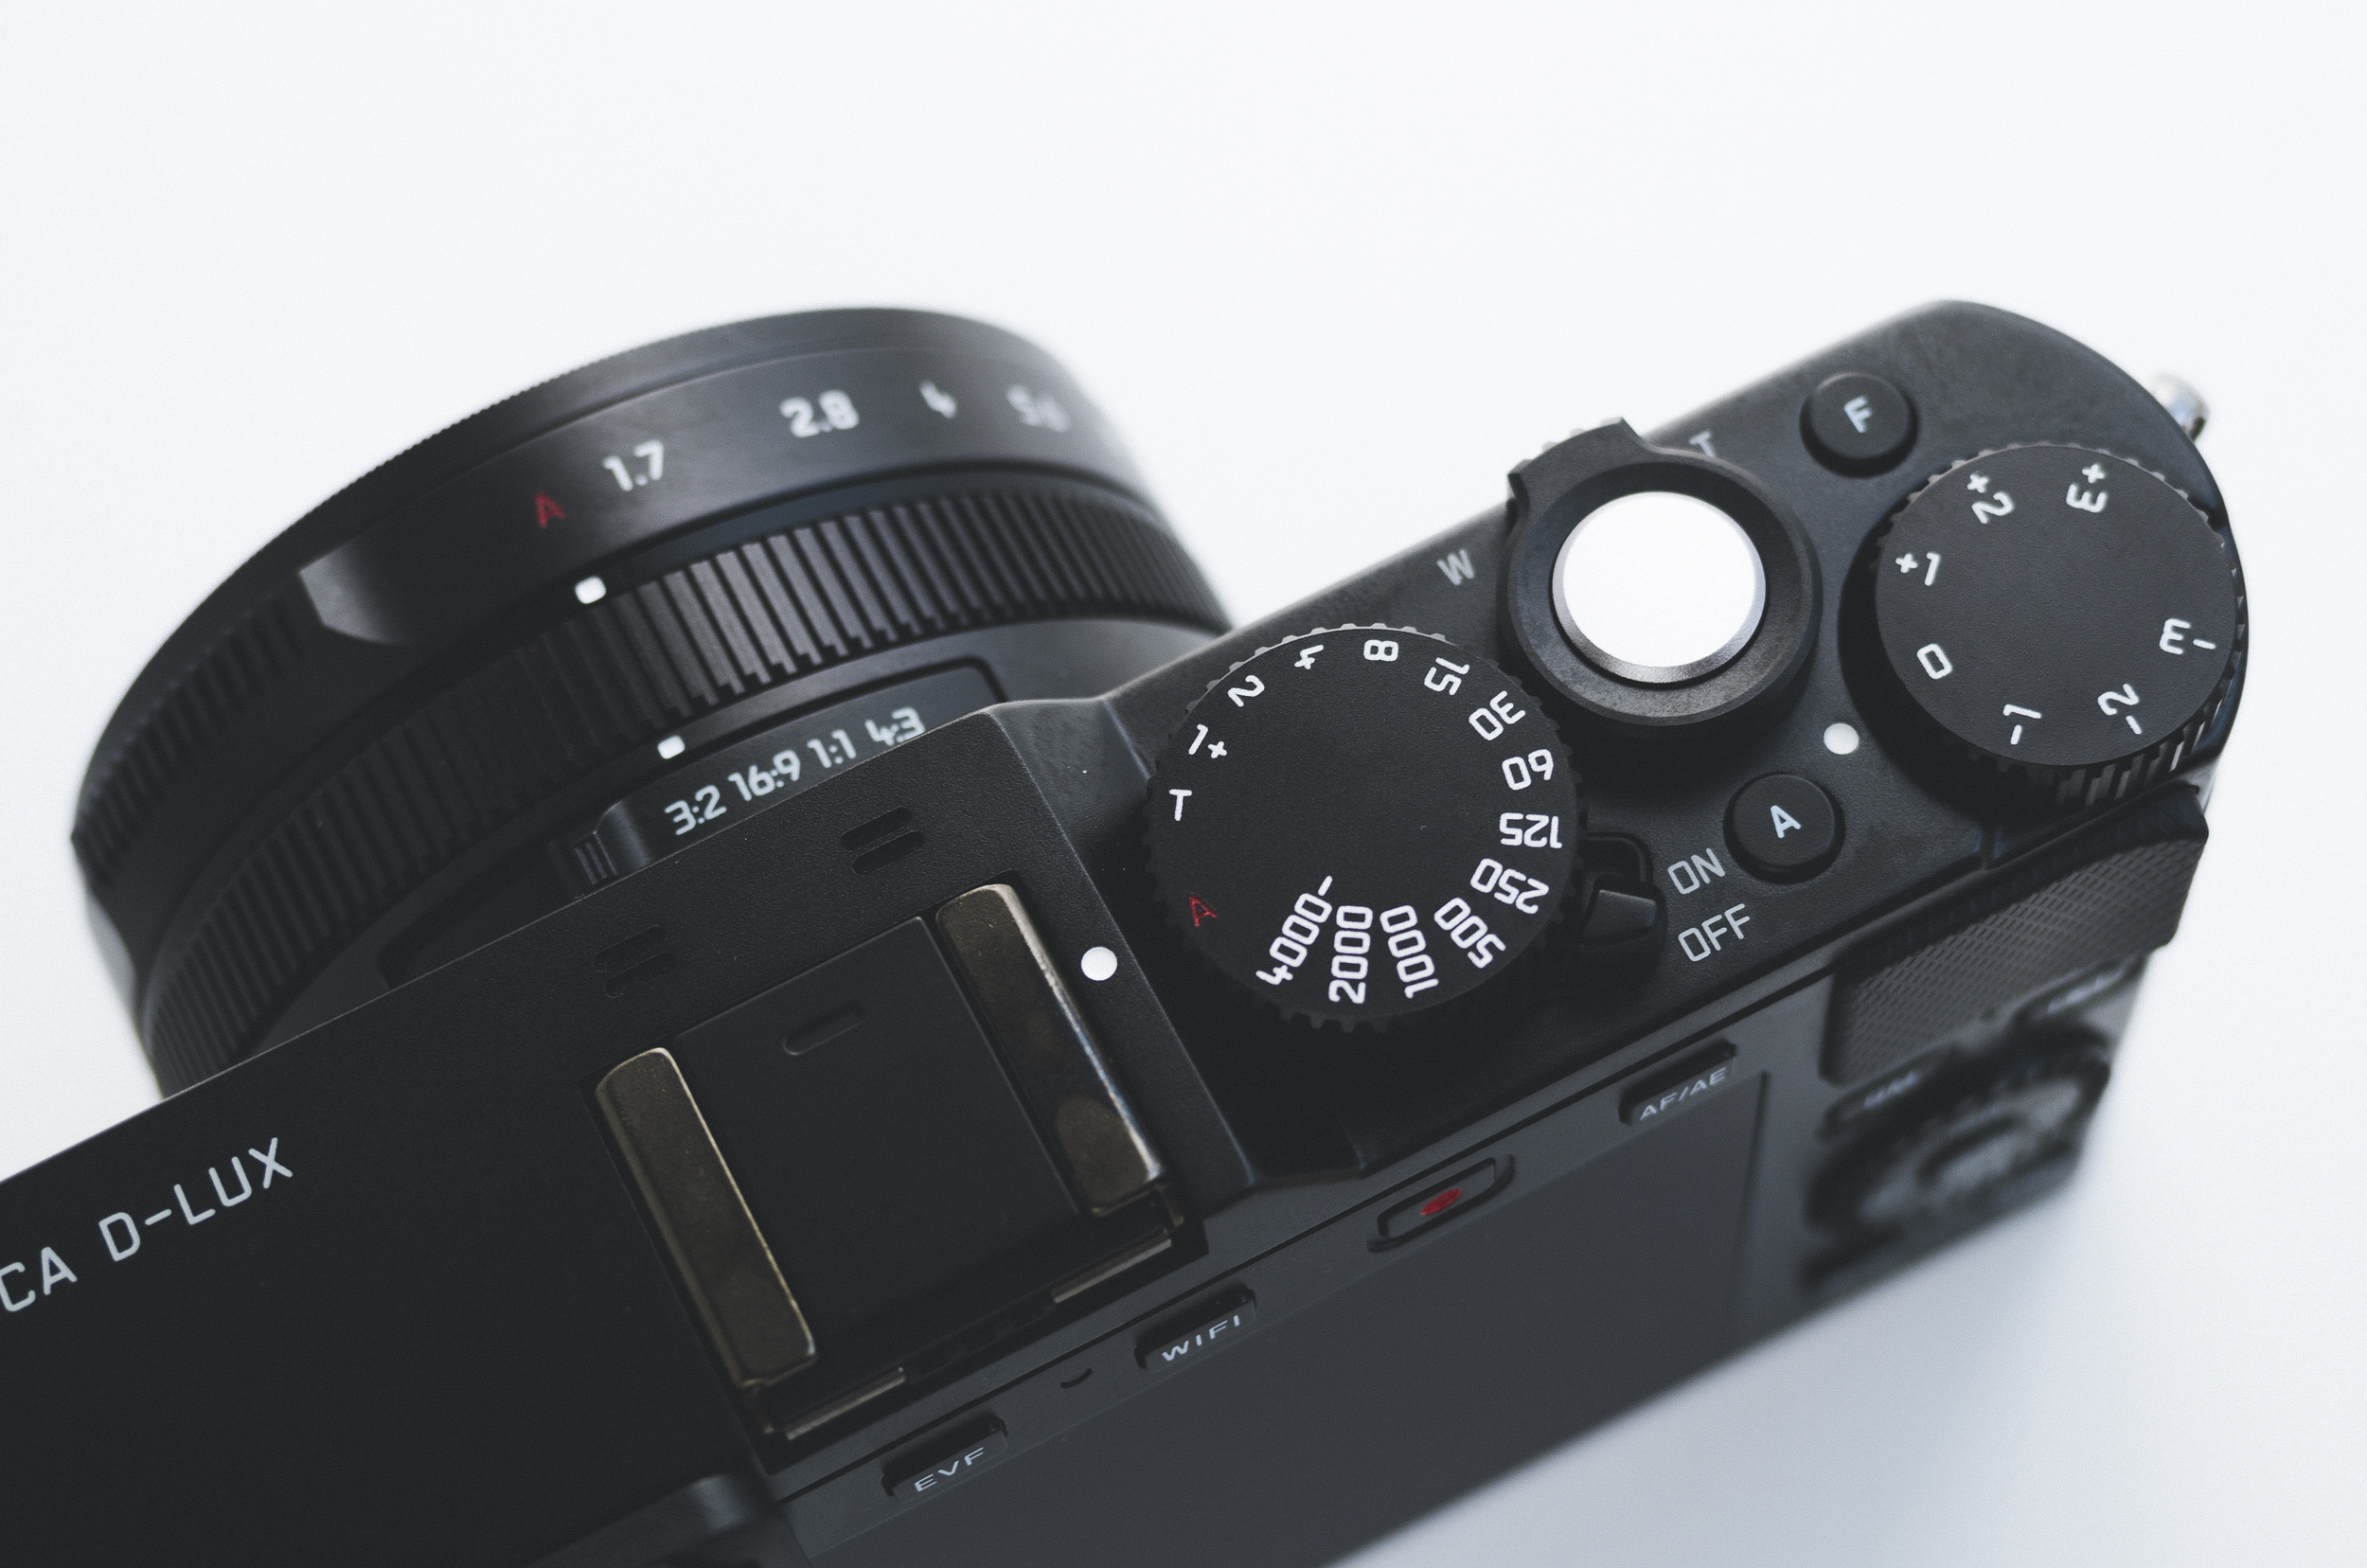 Review of the new LEICA D-LUX (typ 109) — Benjamin Traves